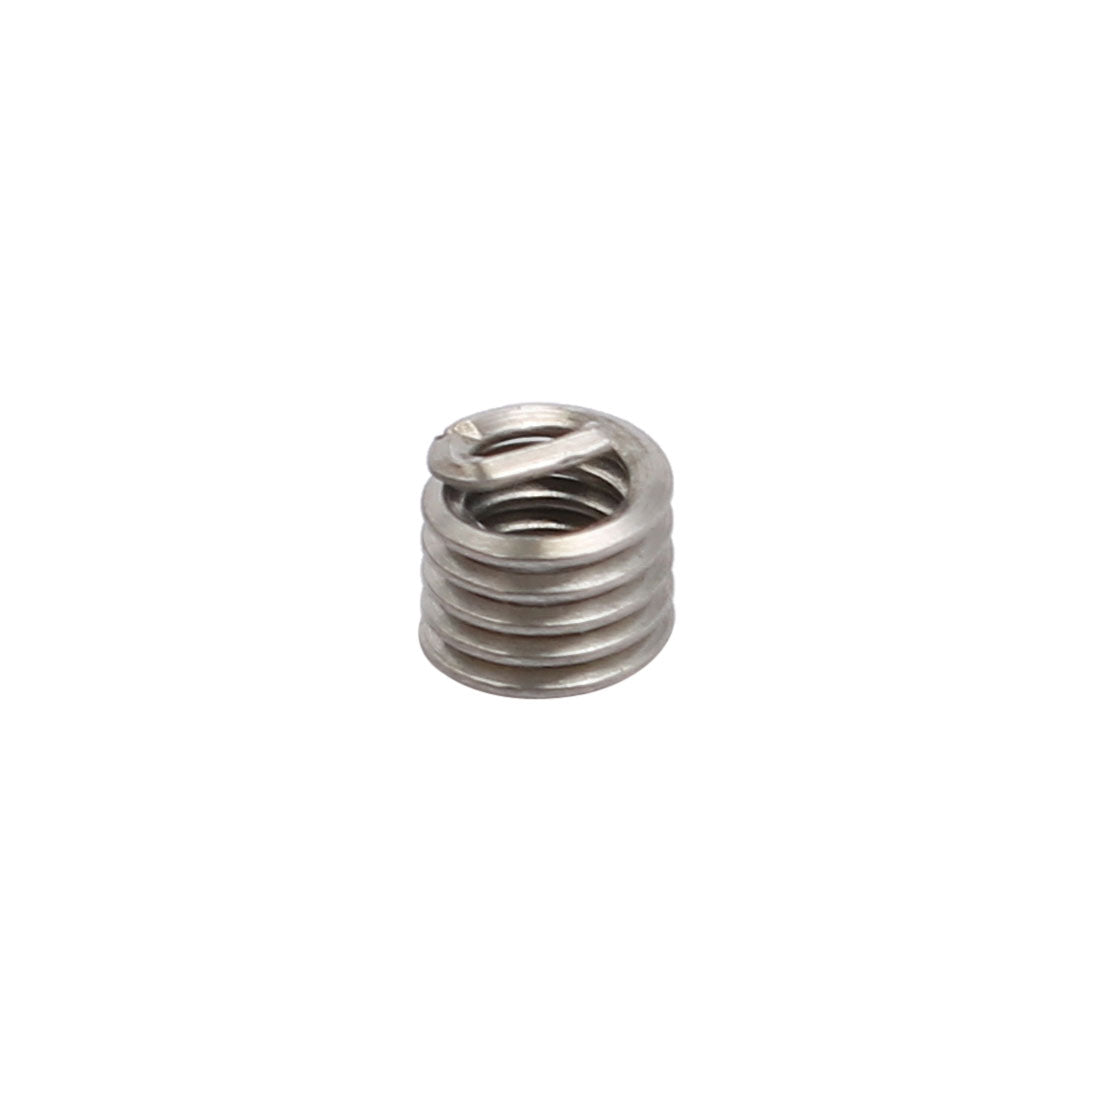 uxcell Uxcell #4-40x0.168" 304 Stainless Steel Helical Coil Wire Thread Insert 12pcs